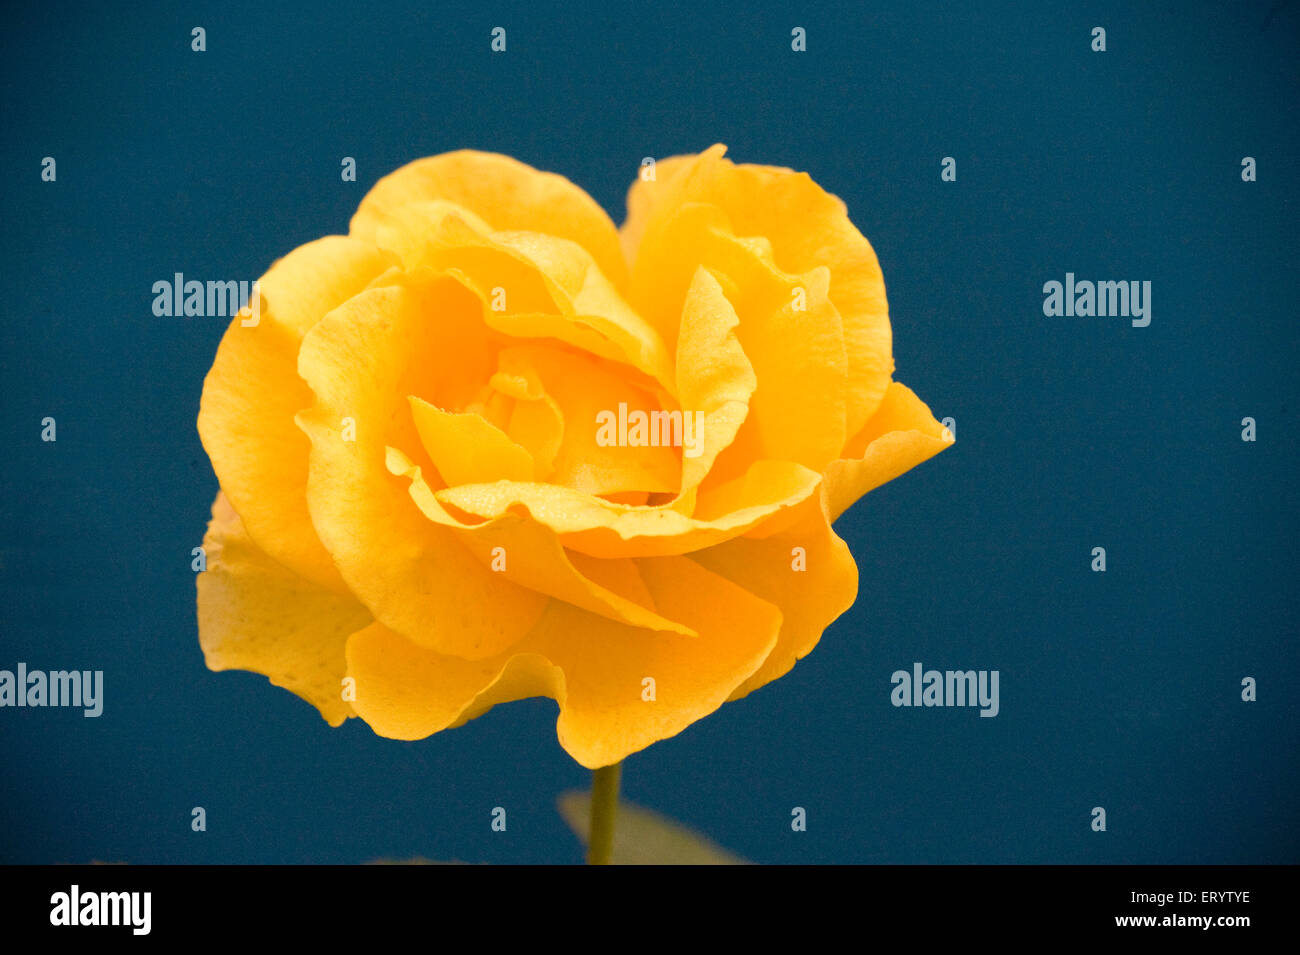 Rose flower yellow on blue background, West Bengal, India, Asia Stock Photo